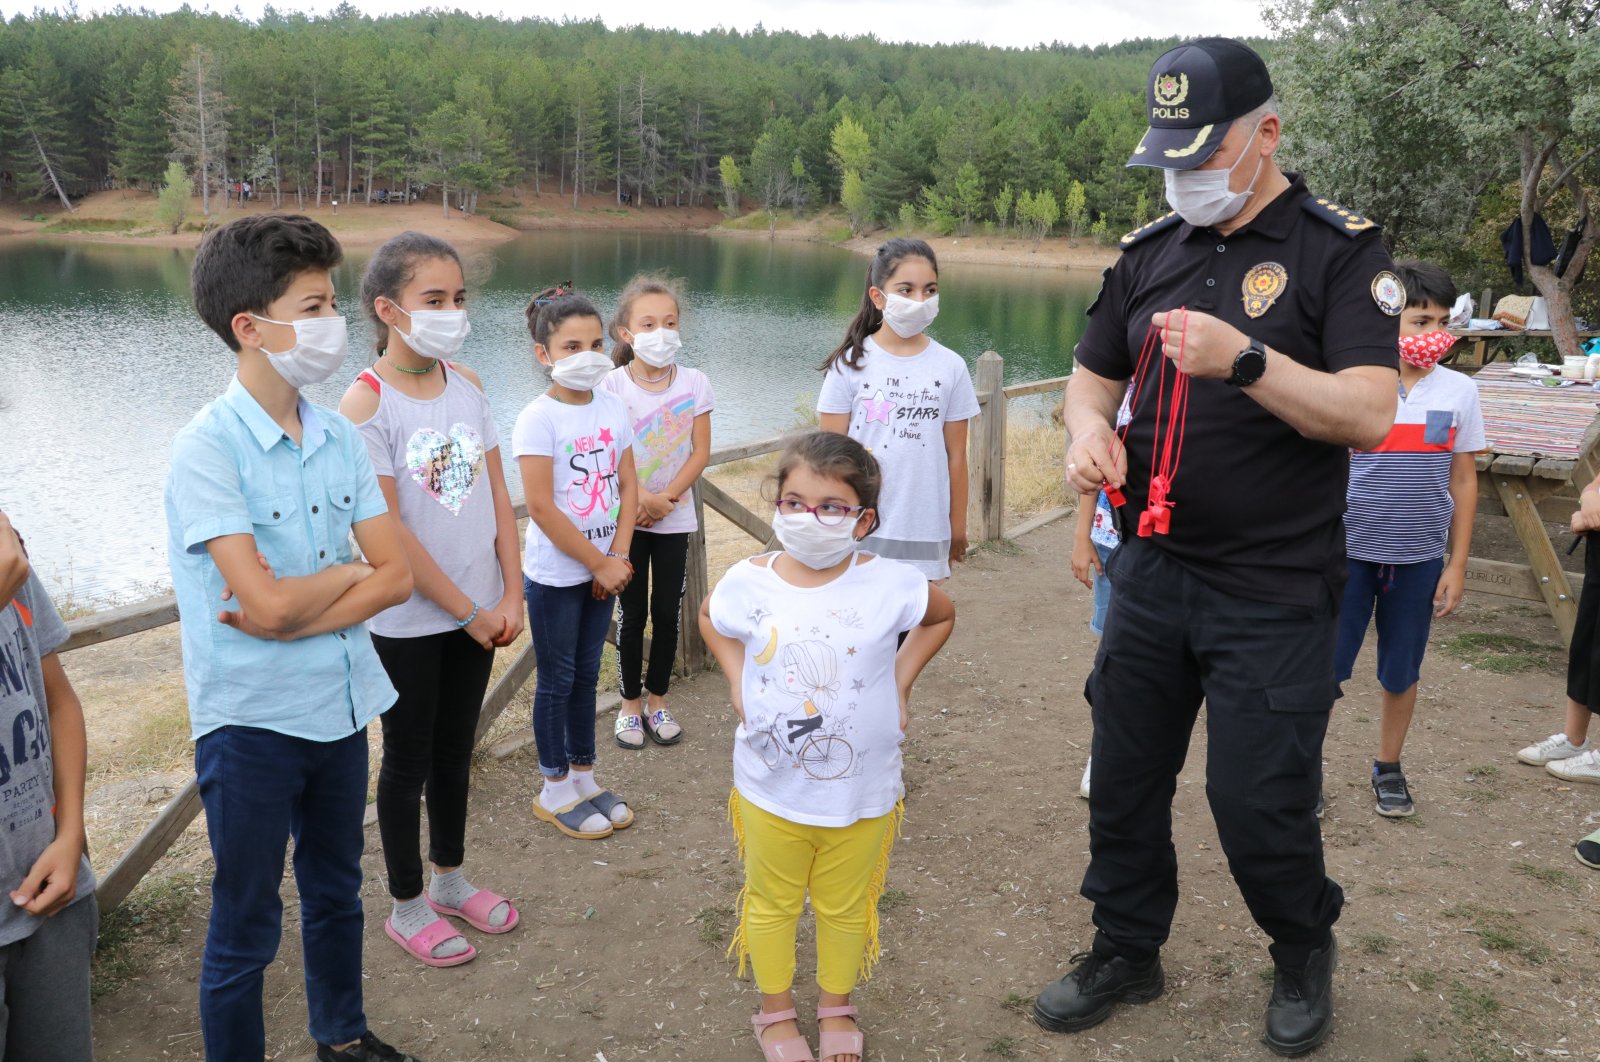 Police officers take part in a program to raise awareness about the coronavirus pandemic in central Yozgat province, Turkey, Aug. 2, 2020. (AA Photo)